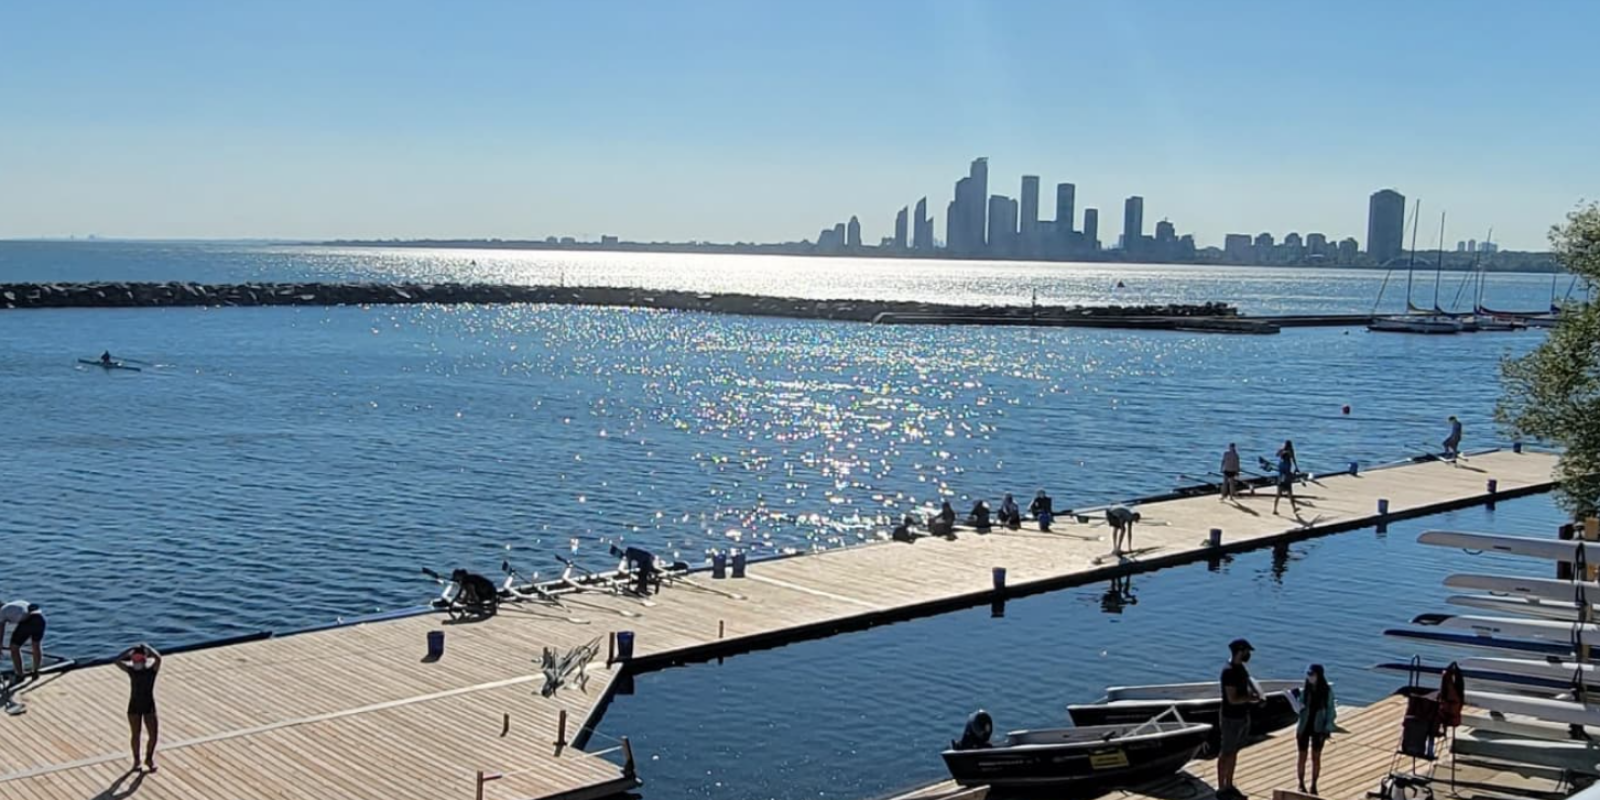 Three years after the raise: an update from the Argonaut Rowing Club